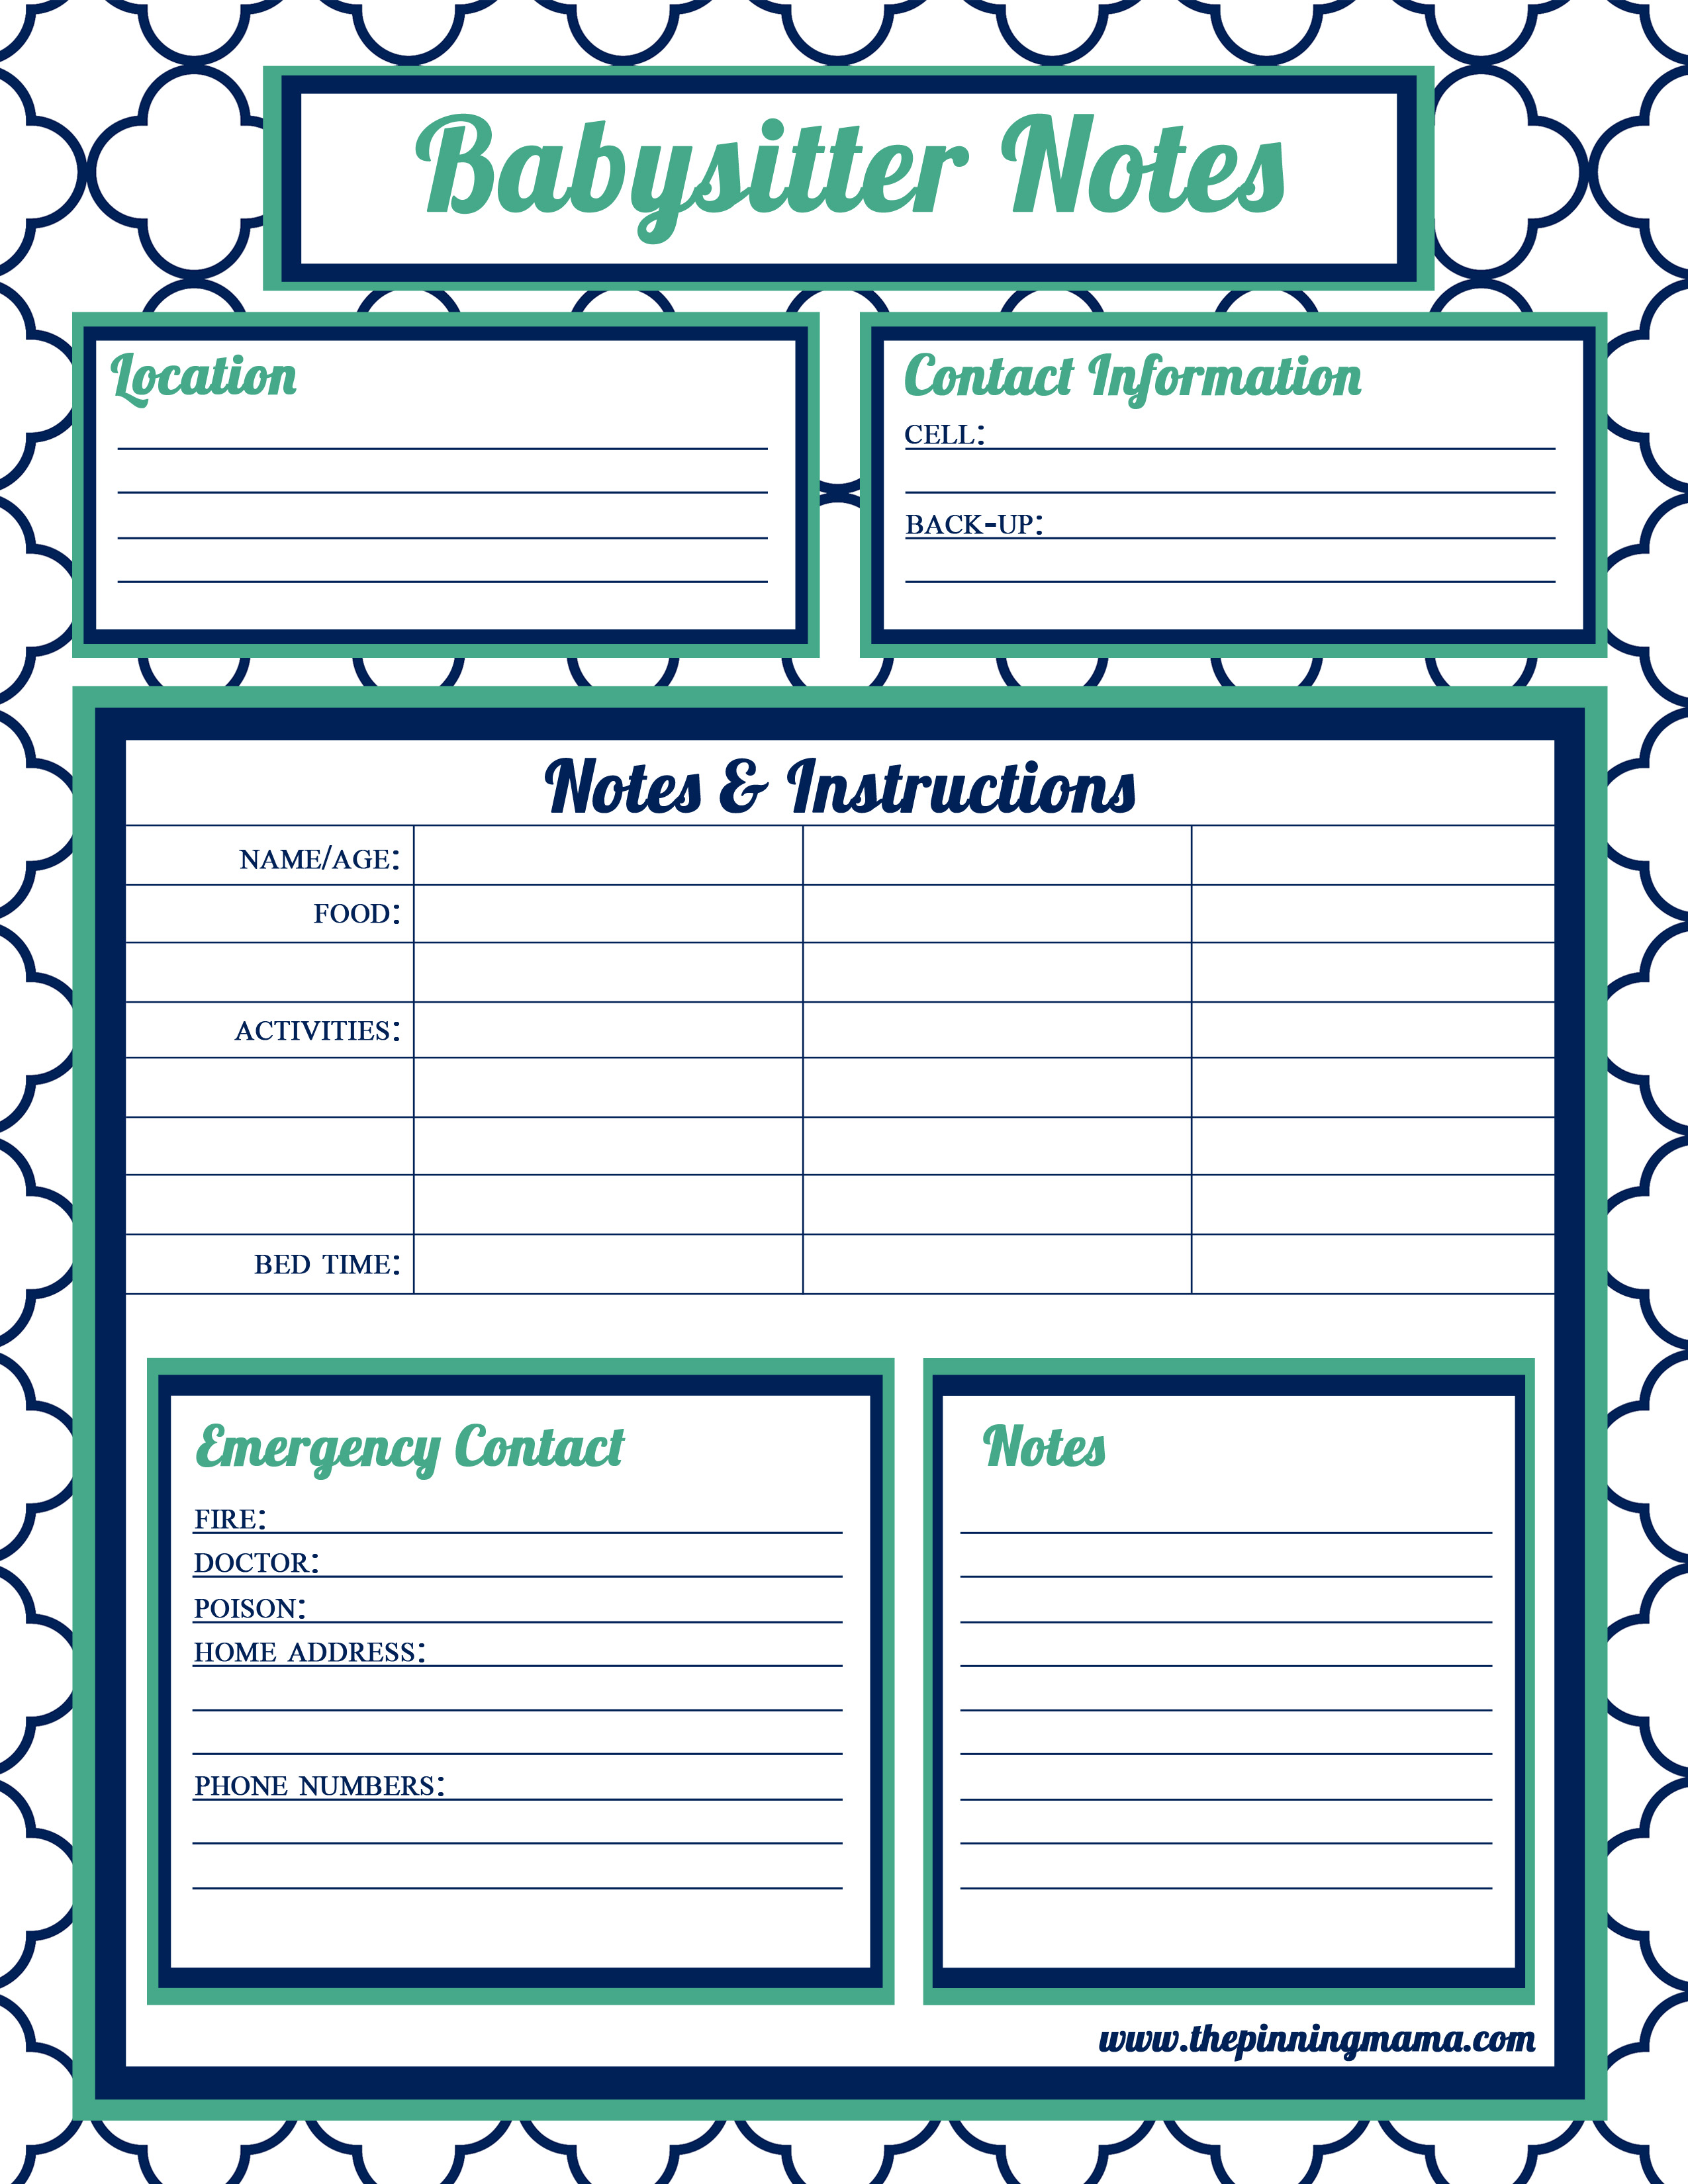 babysitting-forms-printable-free-printable-forms-free-online